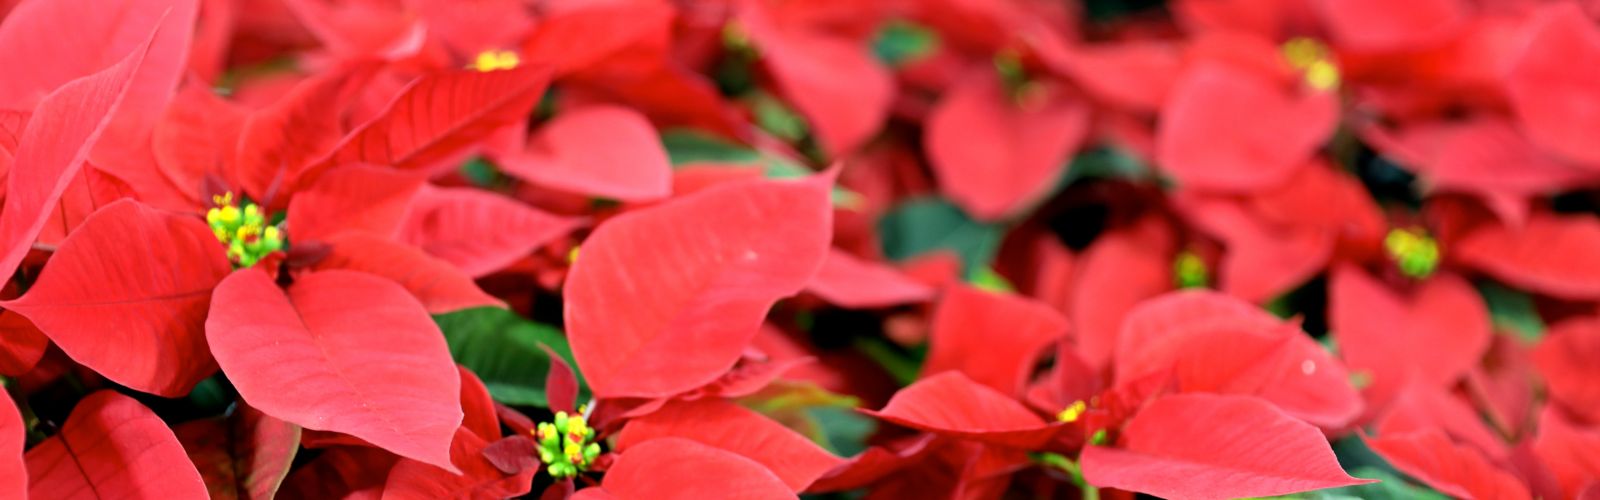 red poinsettia flowers with yellow centers with green leaves